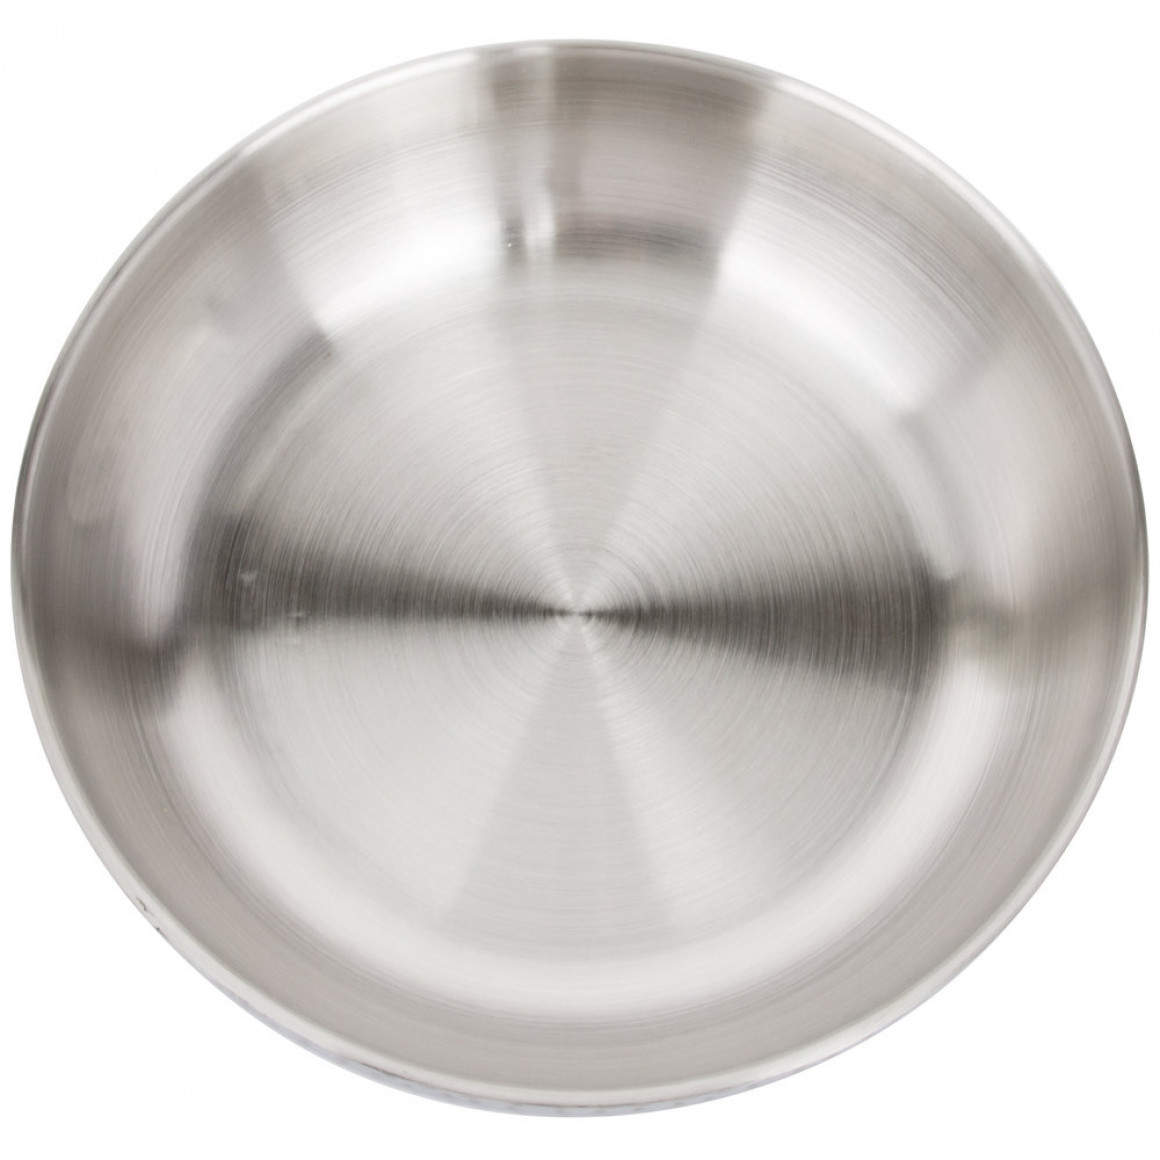 STAINLESS STEEL, HAMMERED BOWL, DOUBLE WALL, 250 OZ.